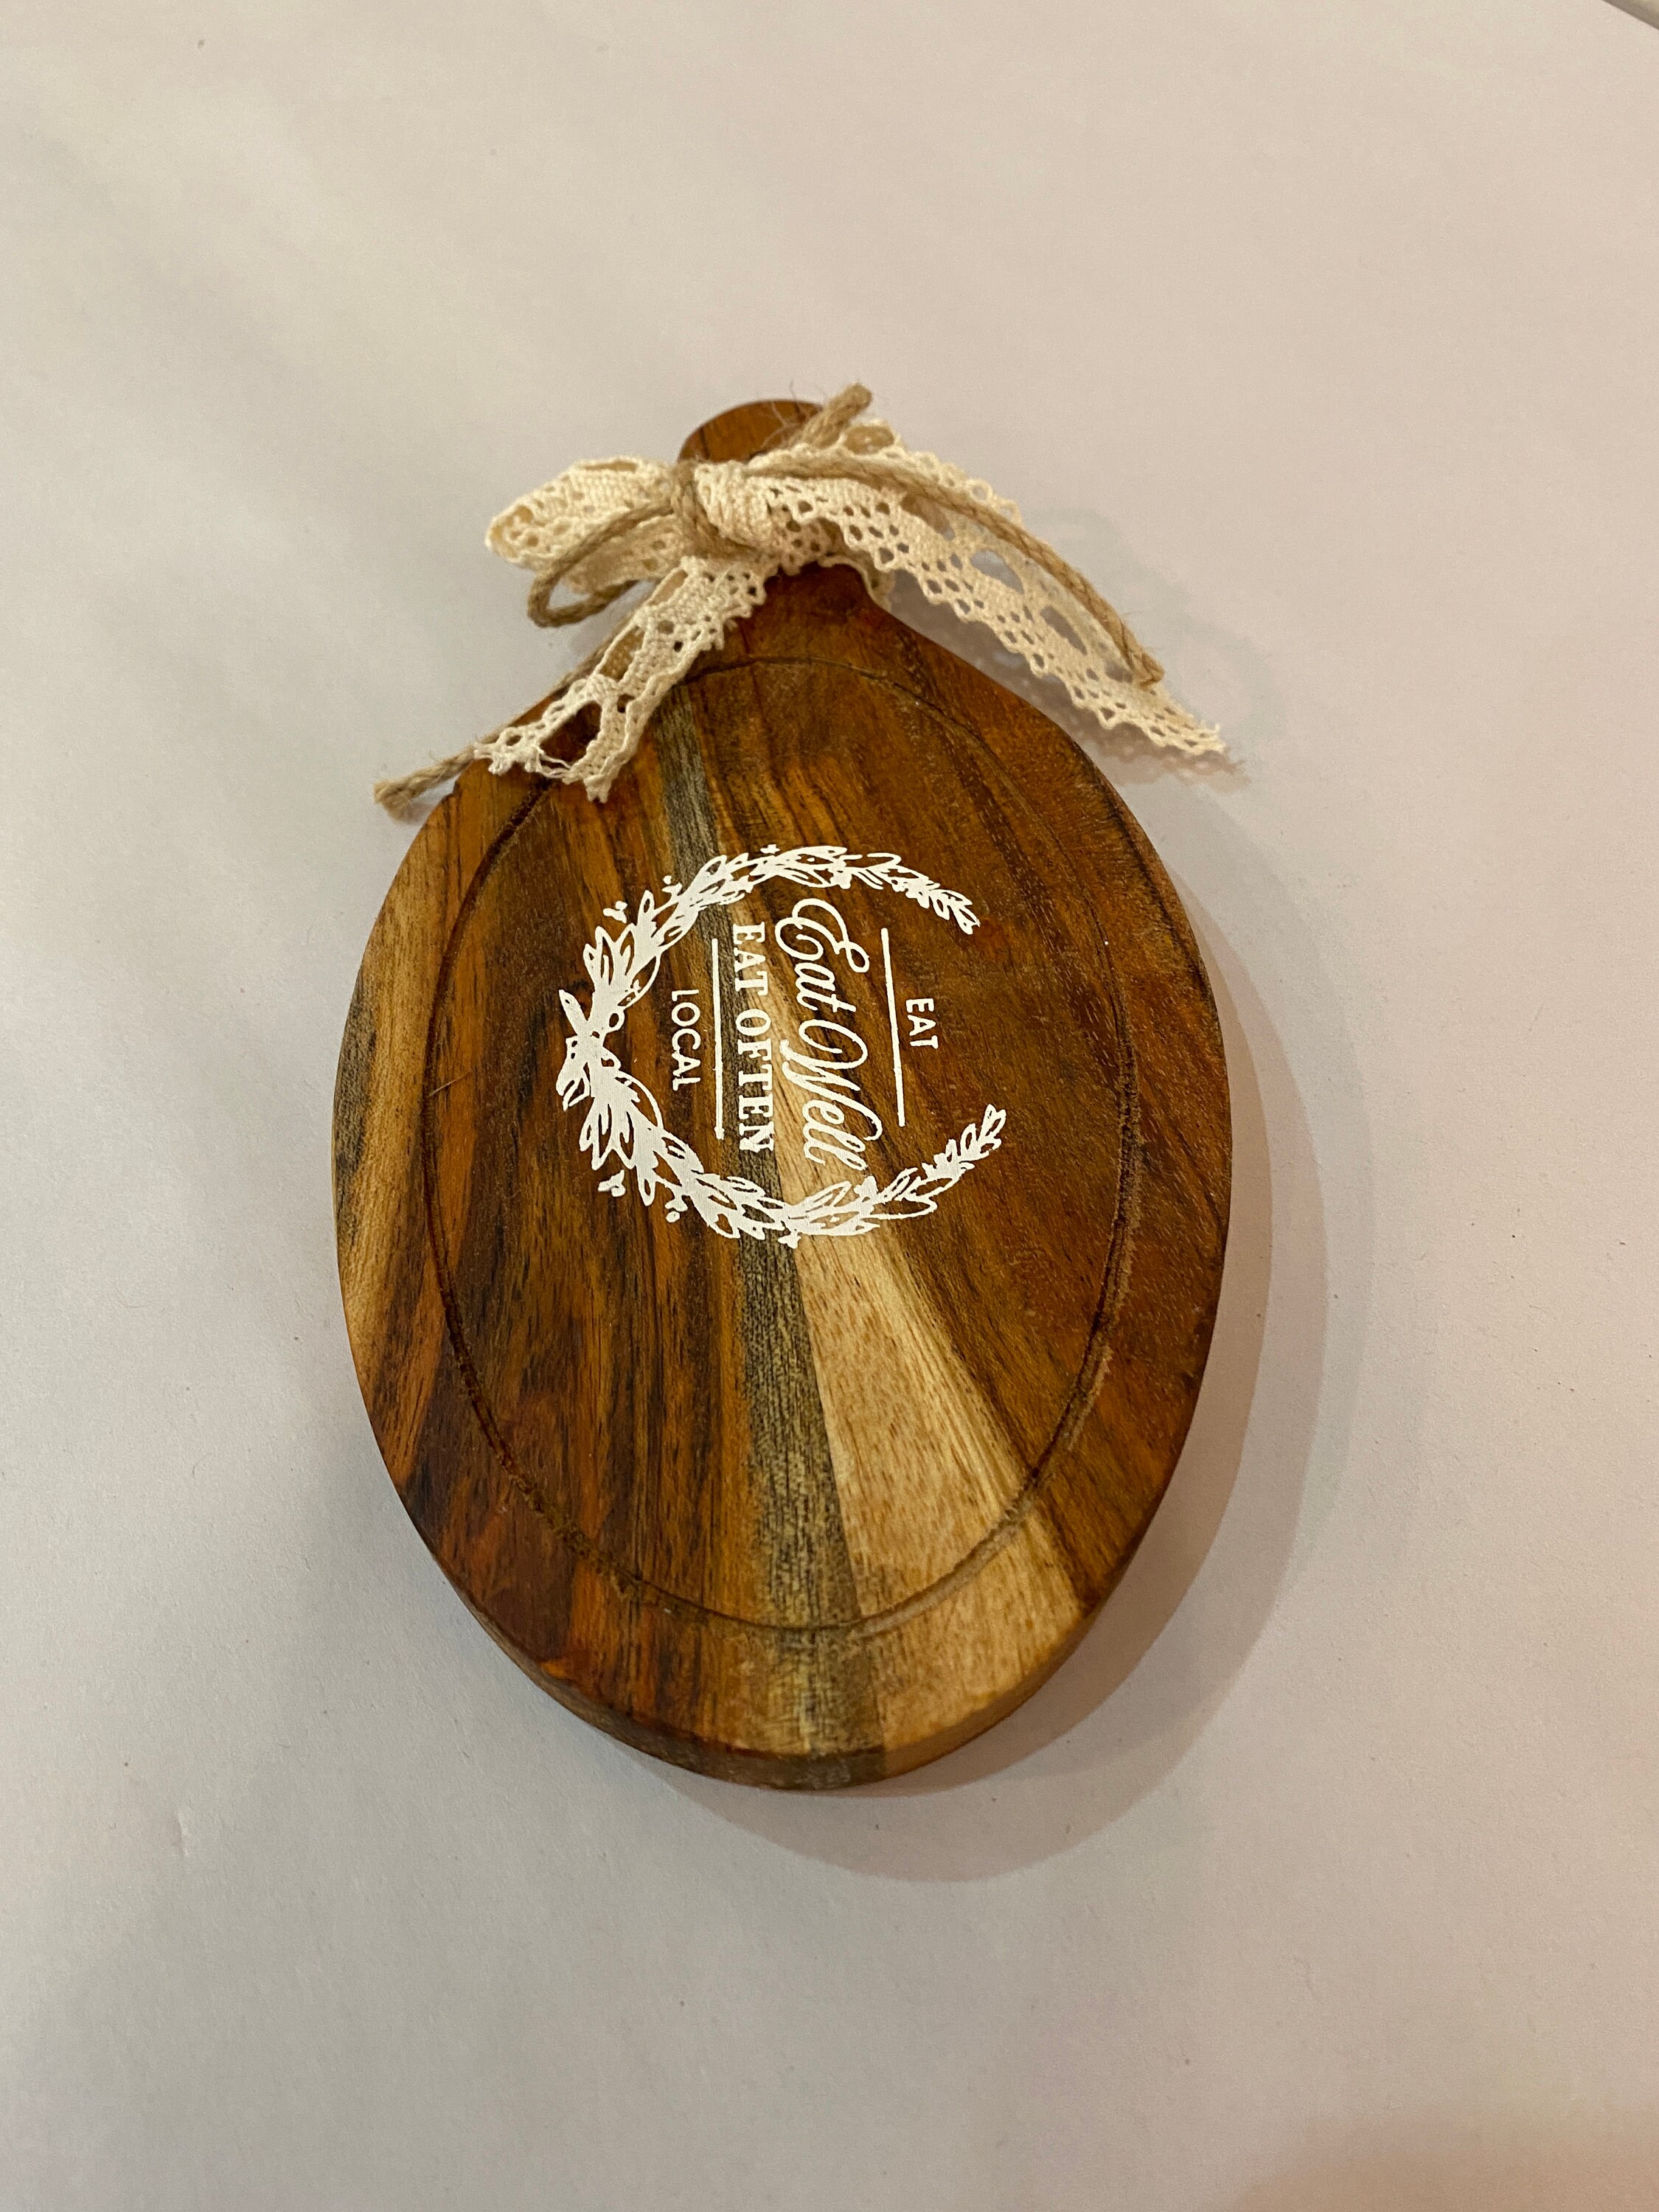 Mini Wood Serving Board - Eat Well - Miller St. Boutique